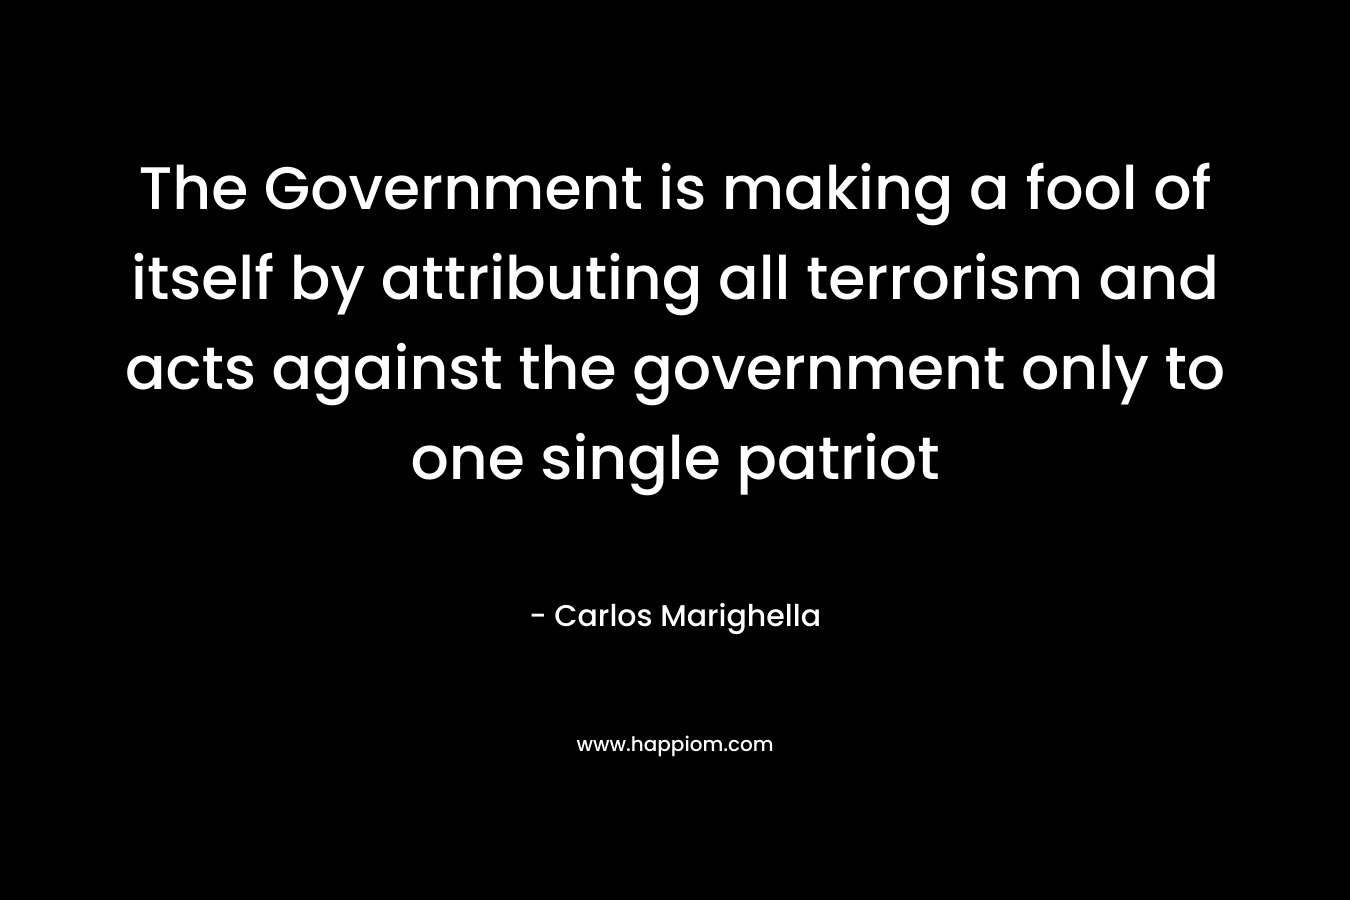 The Government is making a fool of itself by attributing all terrorism and acts against the government only to one single patriot